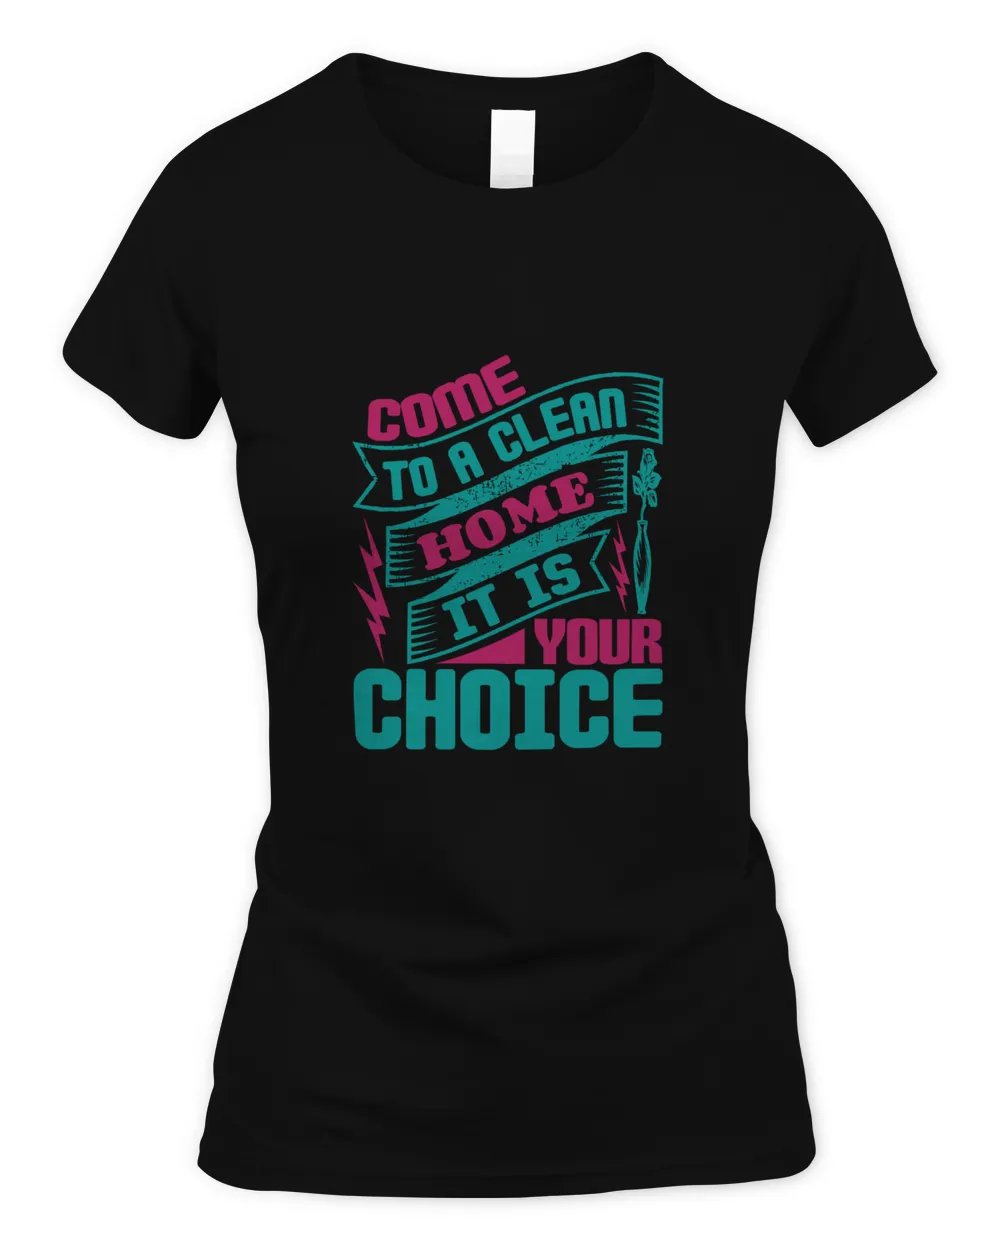 Come To A Clean Home, It’s Your Choice, Cleaner Shirt, Cleaner Gifts, Cleaner, Cleaner Tshirt, Funny Gift For Cleaner